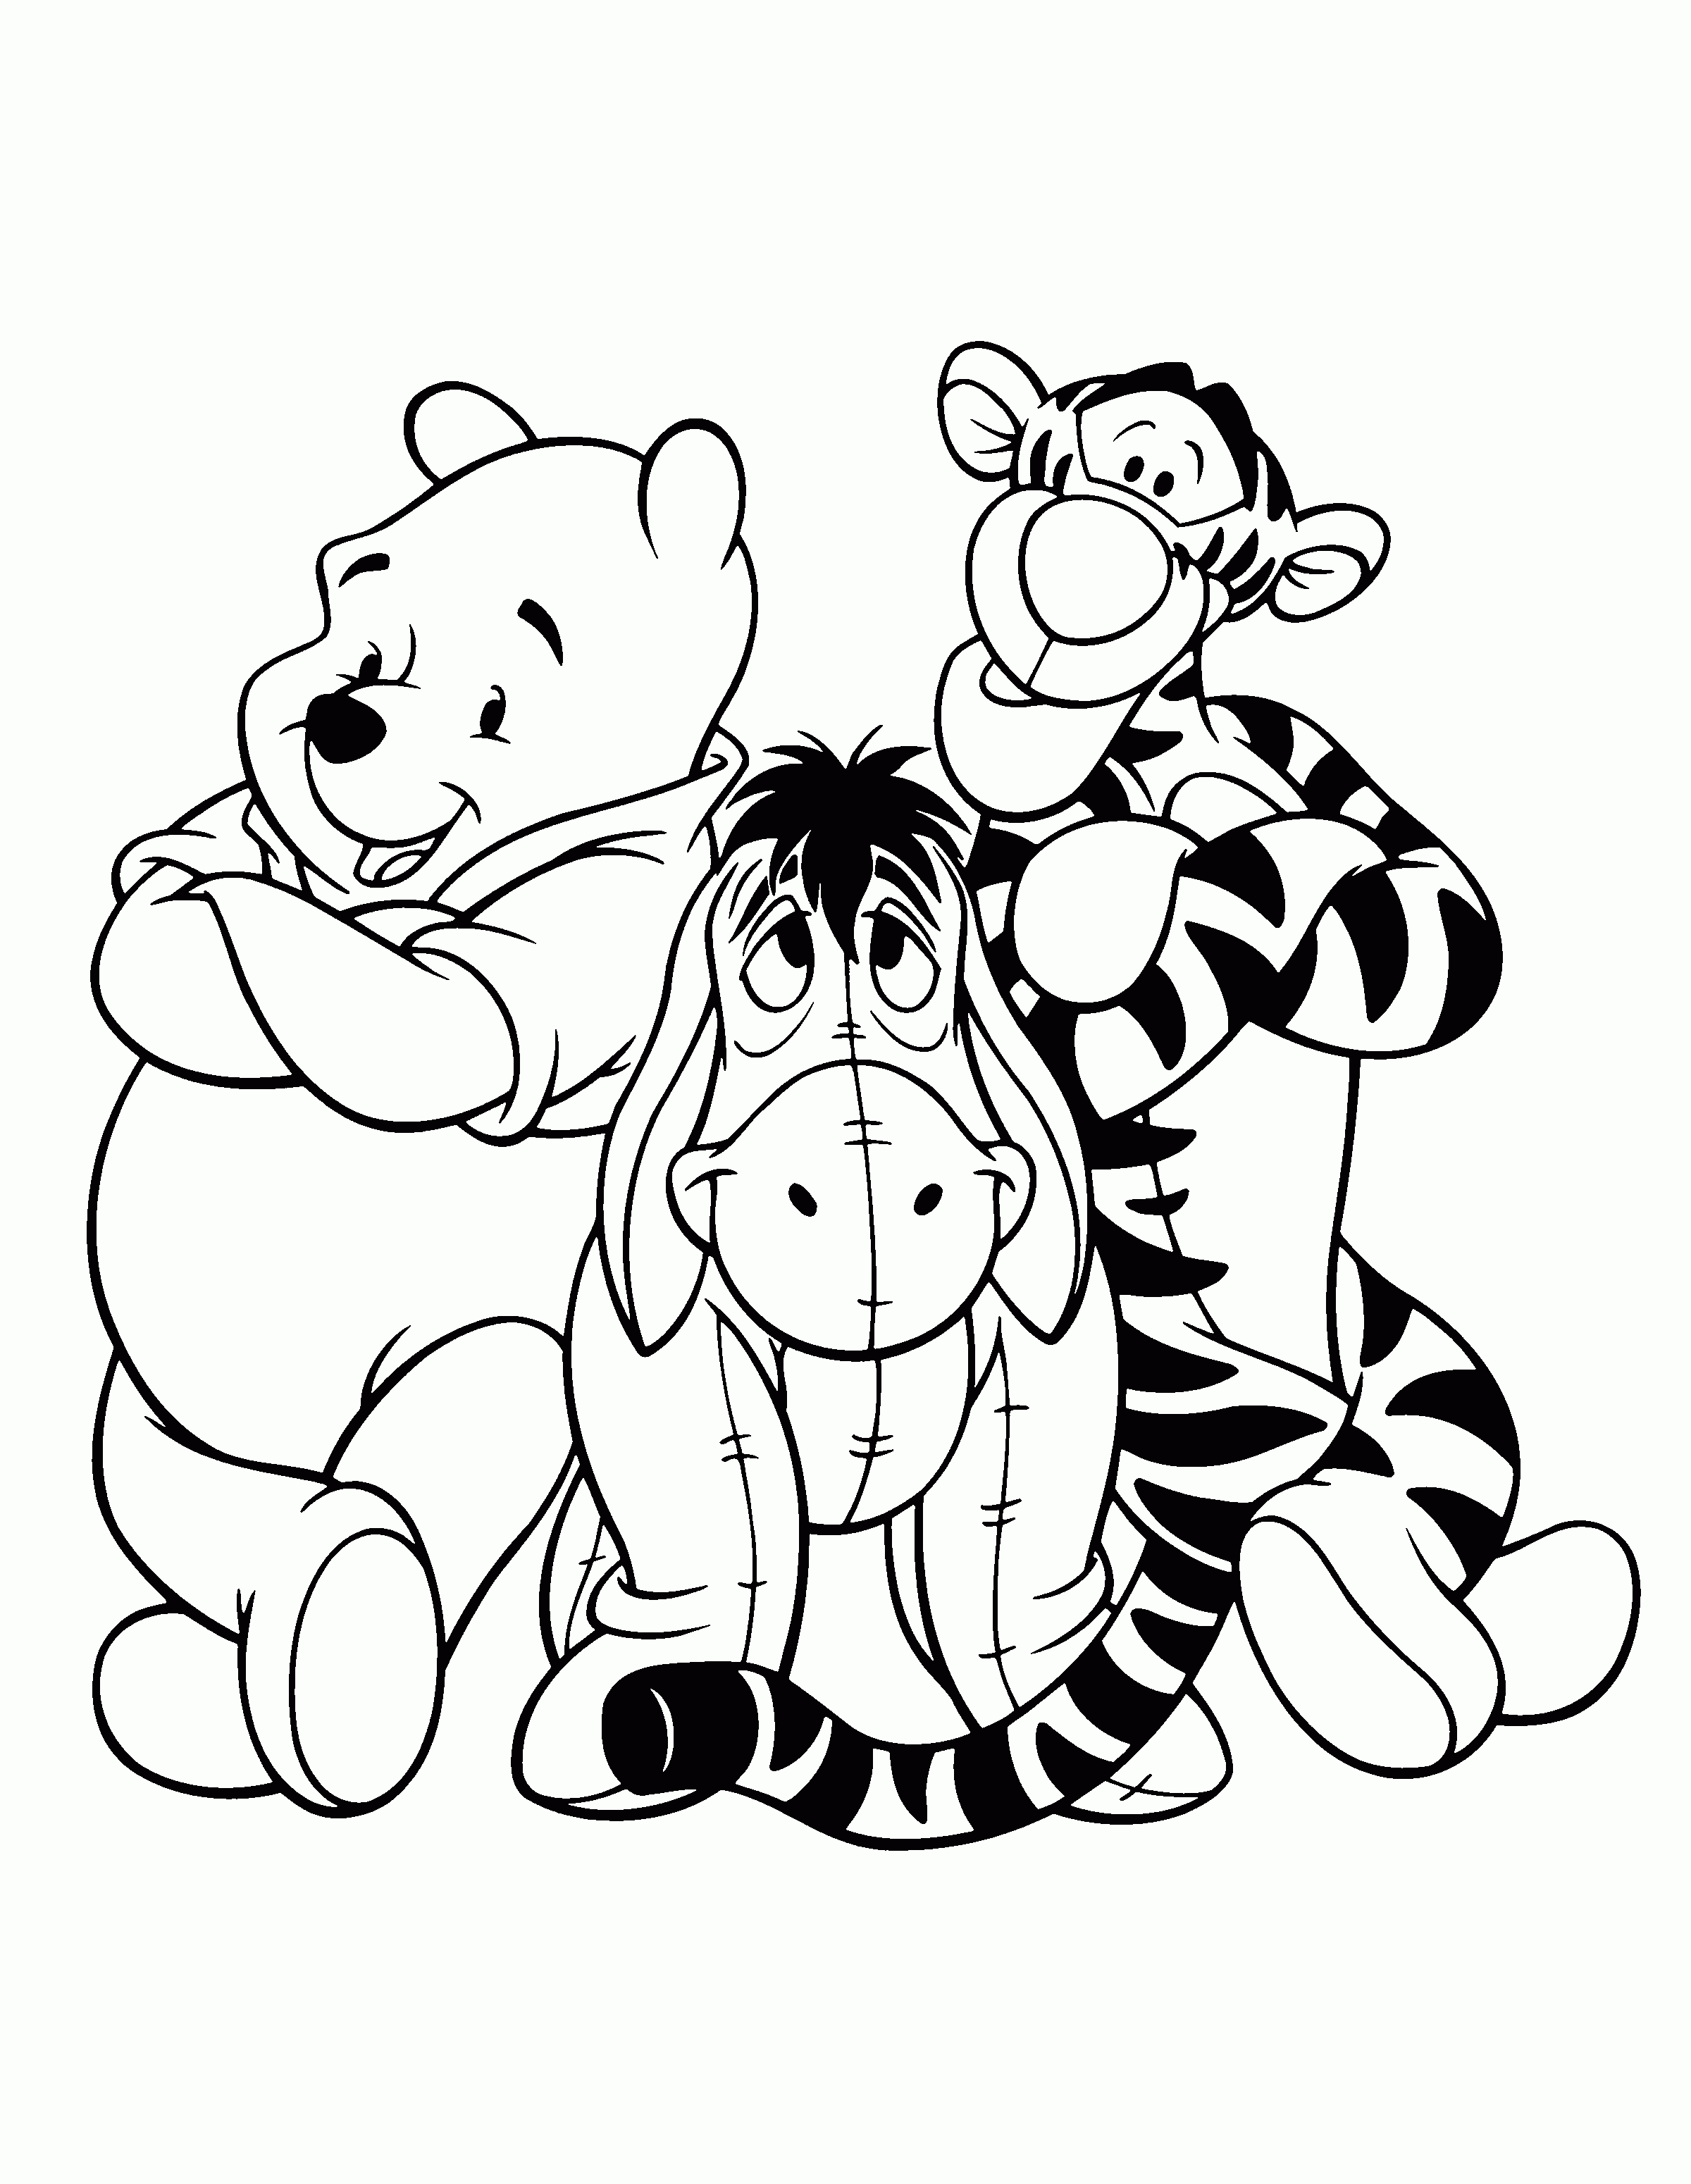 Tigger And Pooh Coloring Page - Coloring Home